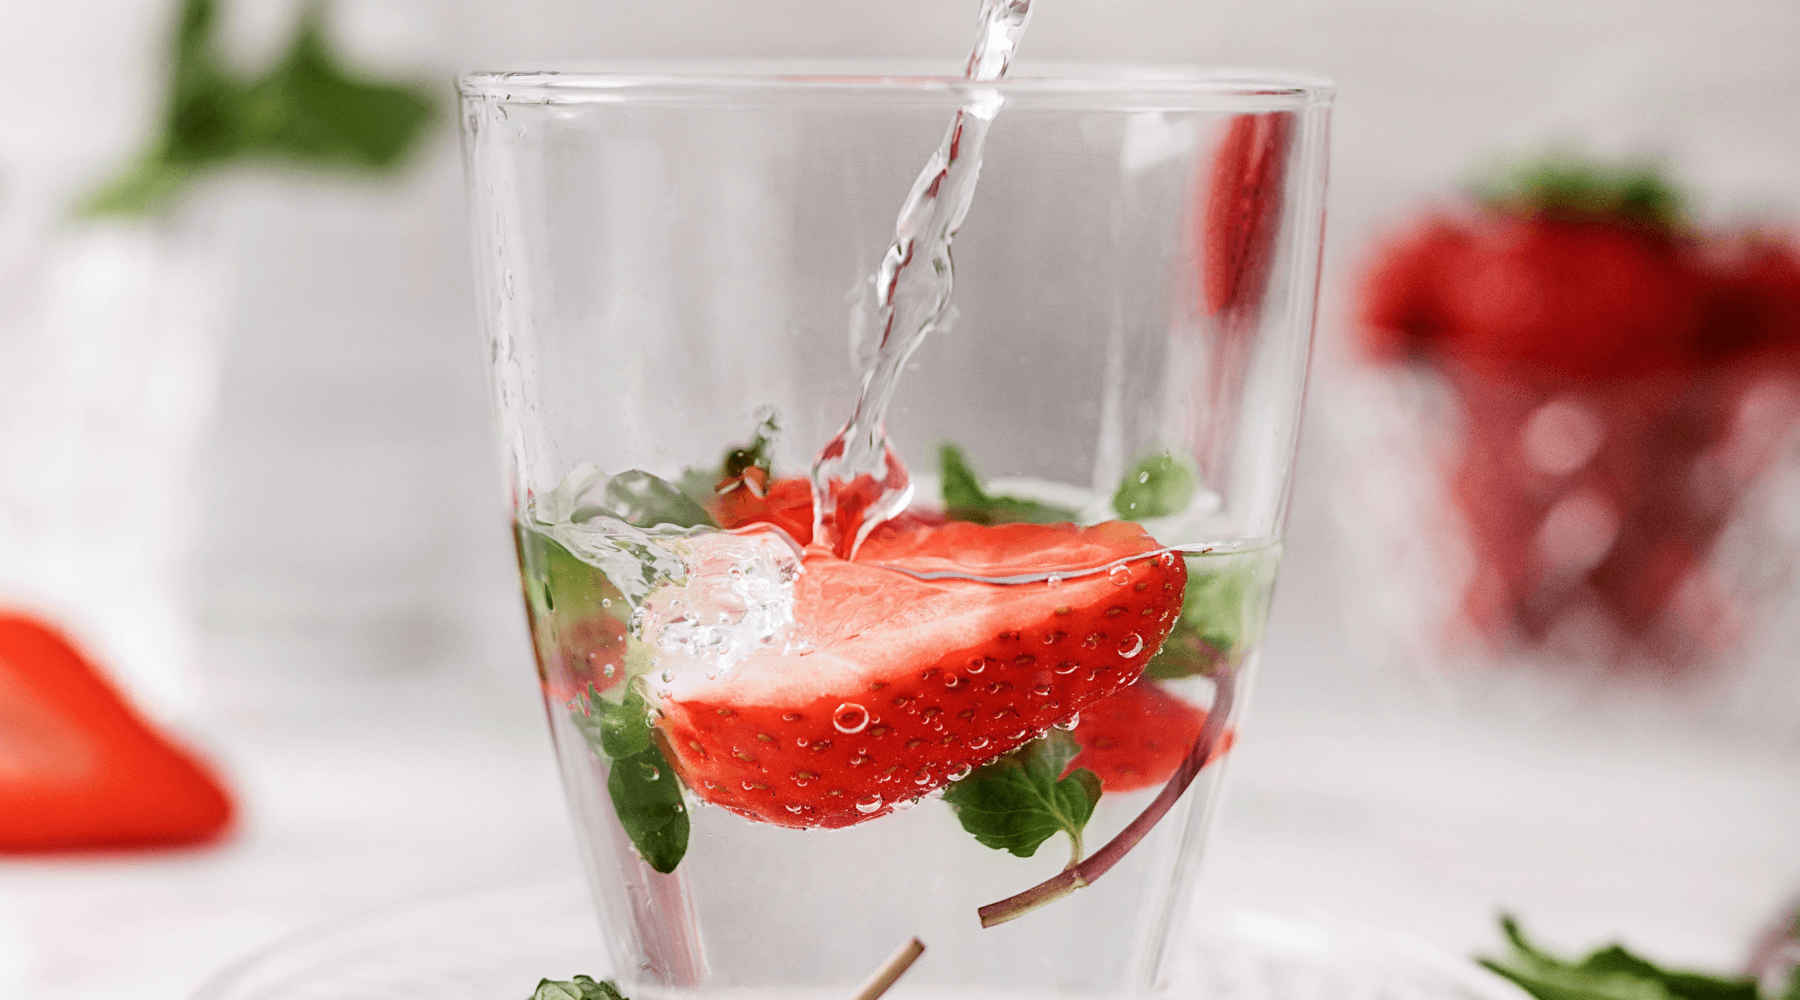 Top 5 Healthiest and Low Calorie Non-Alcoholic Drinks for Women